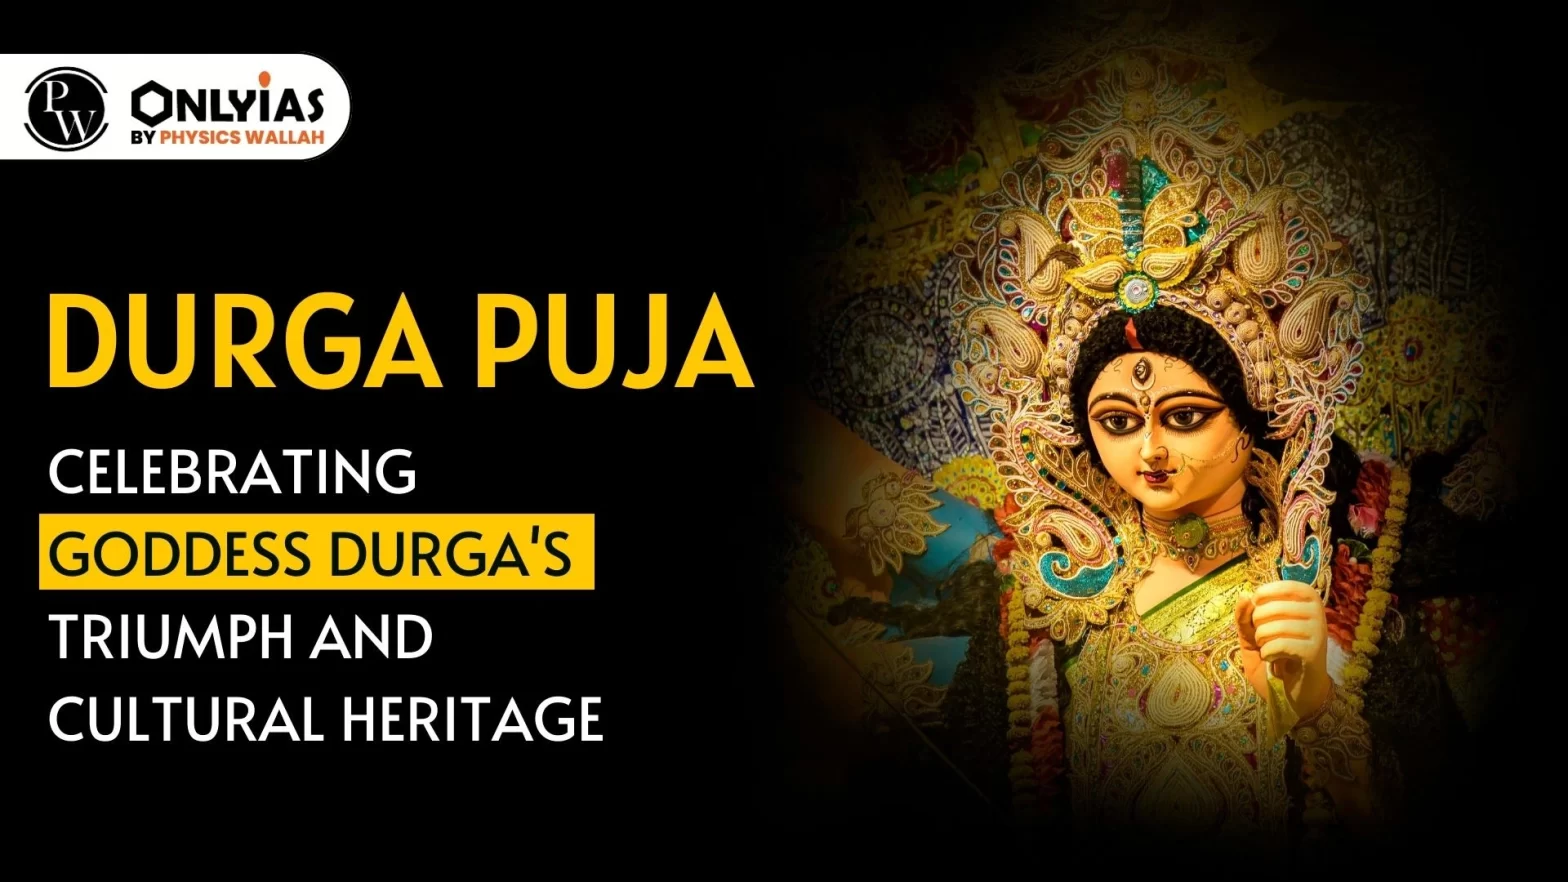 Durga Puja: Intangible Cultural Heritage, Significance and Celebration